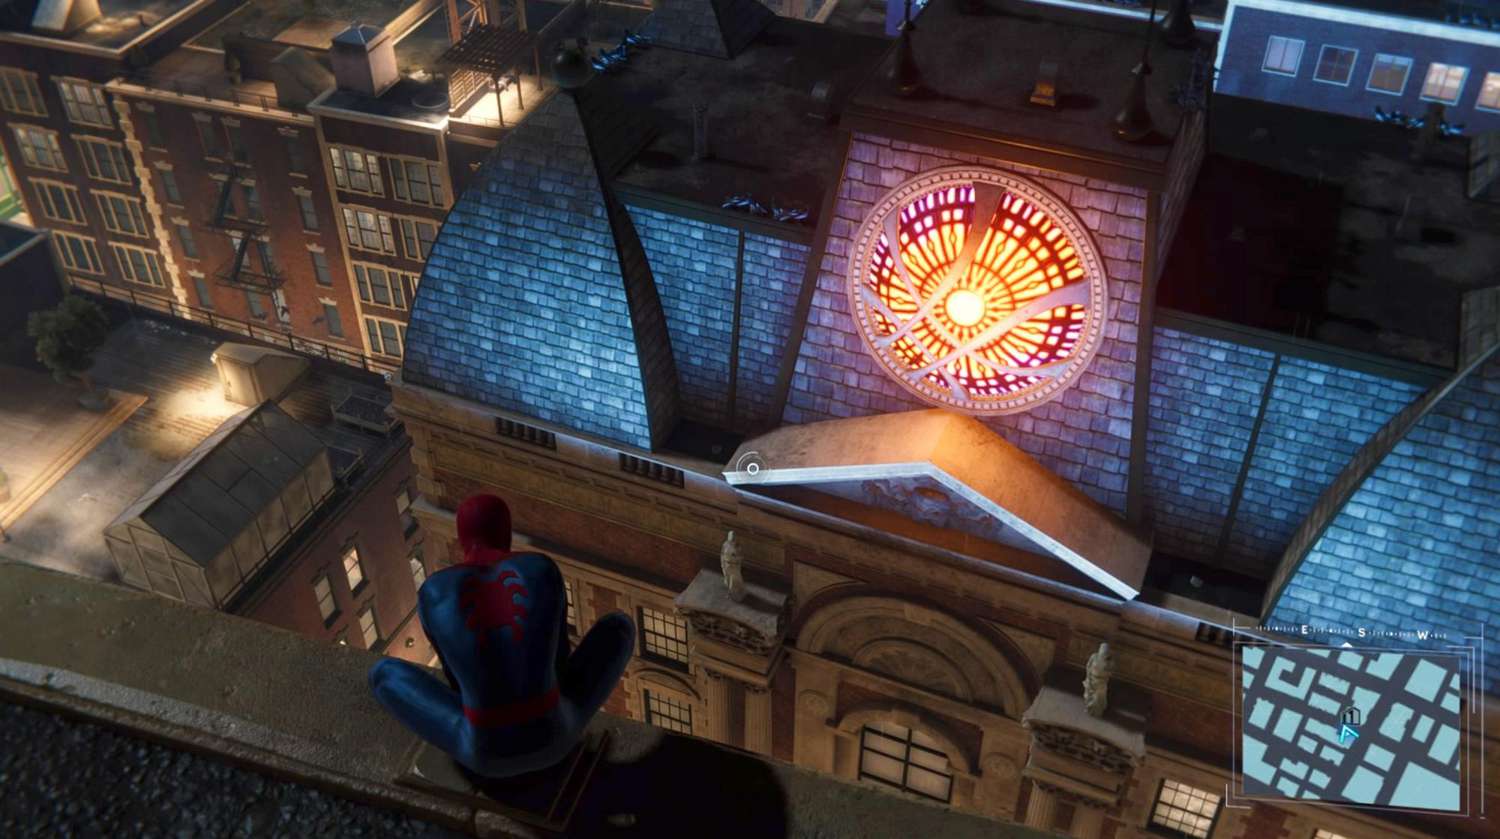 Marvel's Spider-Man on Playstation 4Credit: Sony Interactive Entertainment